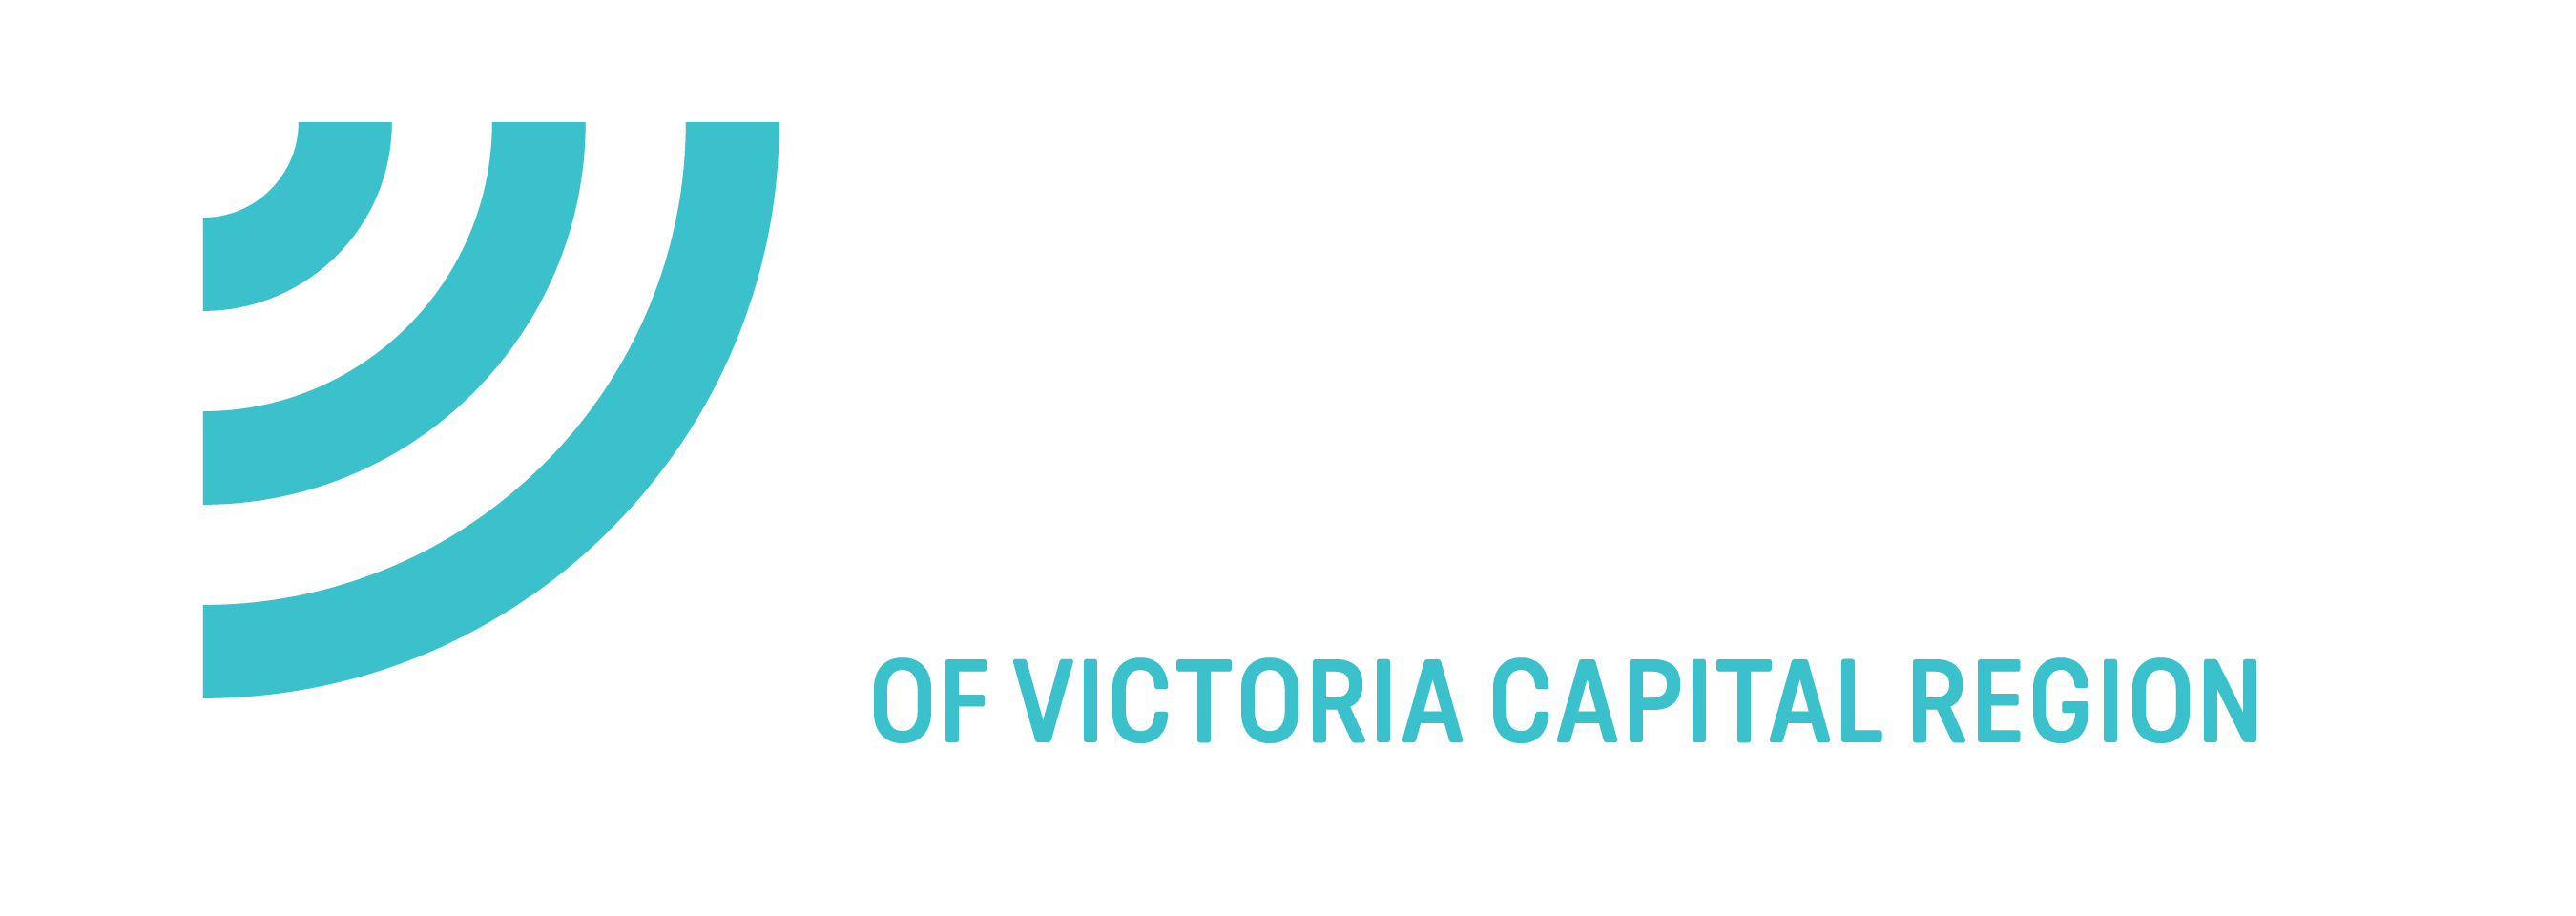 Clothing Donation Centre - Big Brothers Big Sisters of Victoria Capital Region